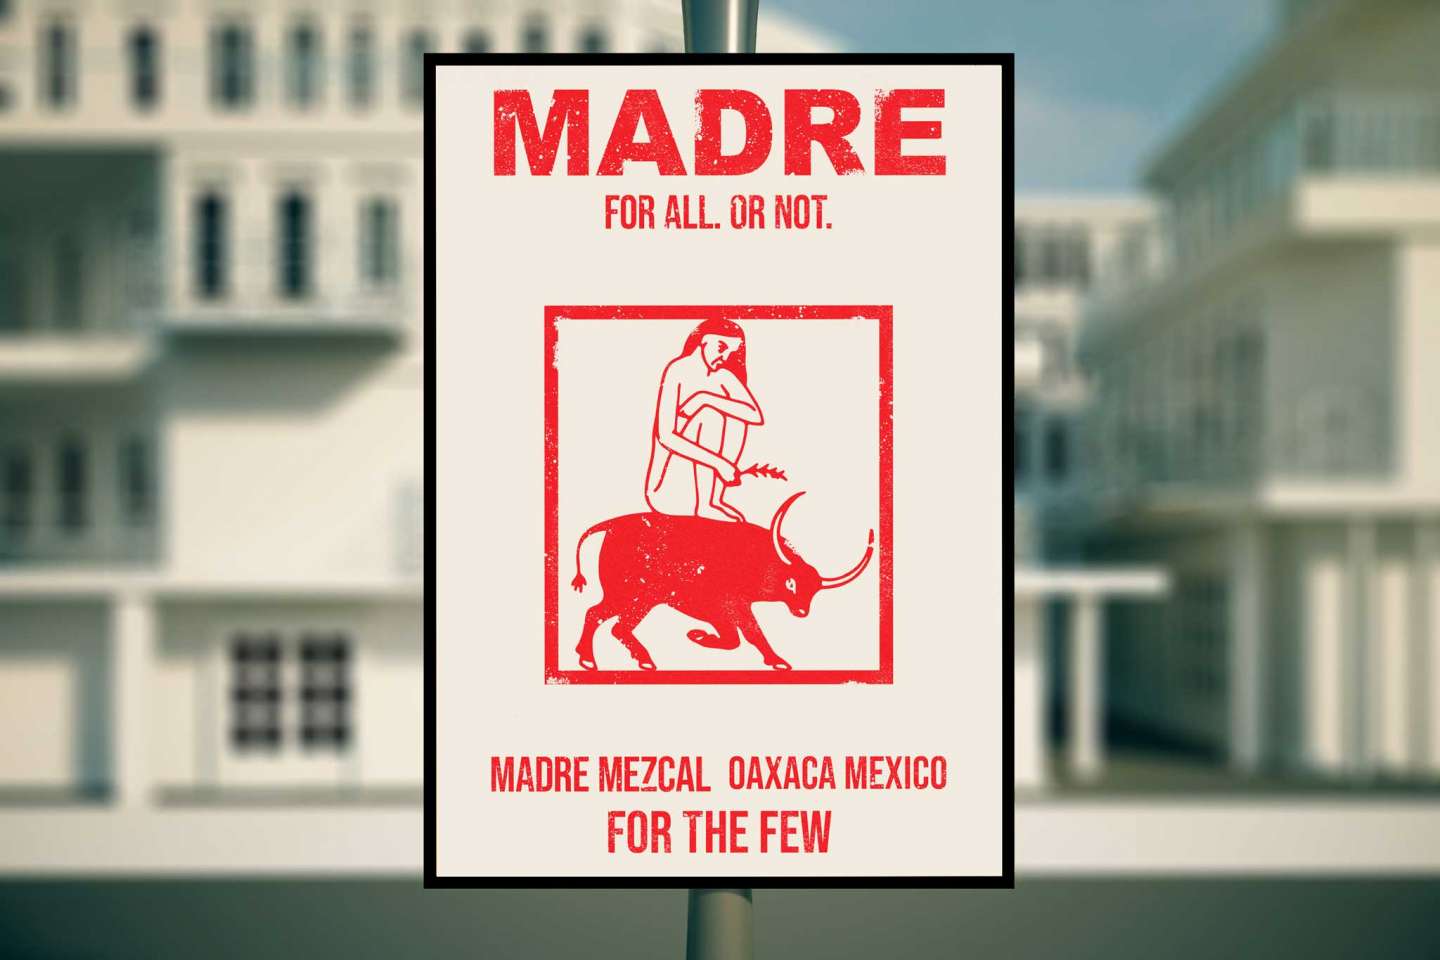 Madre Mezcal/For-The-Few